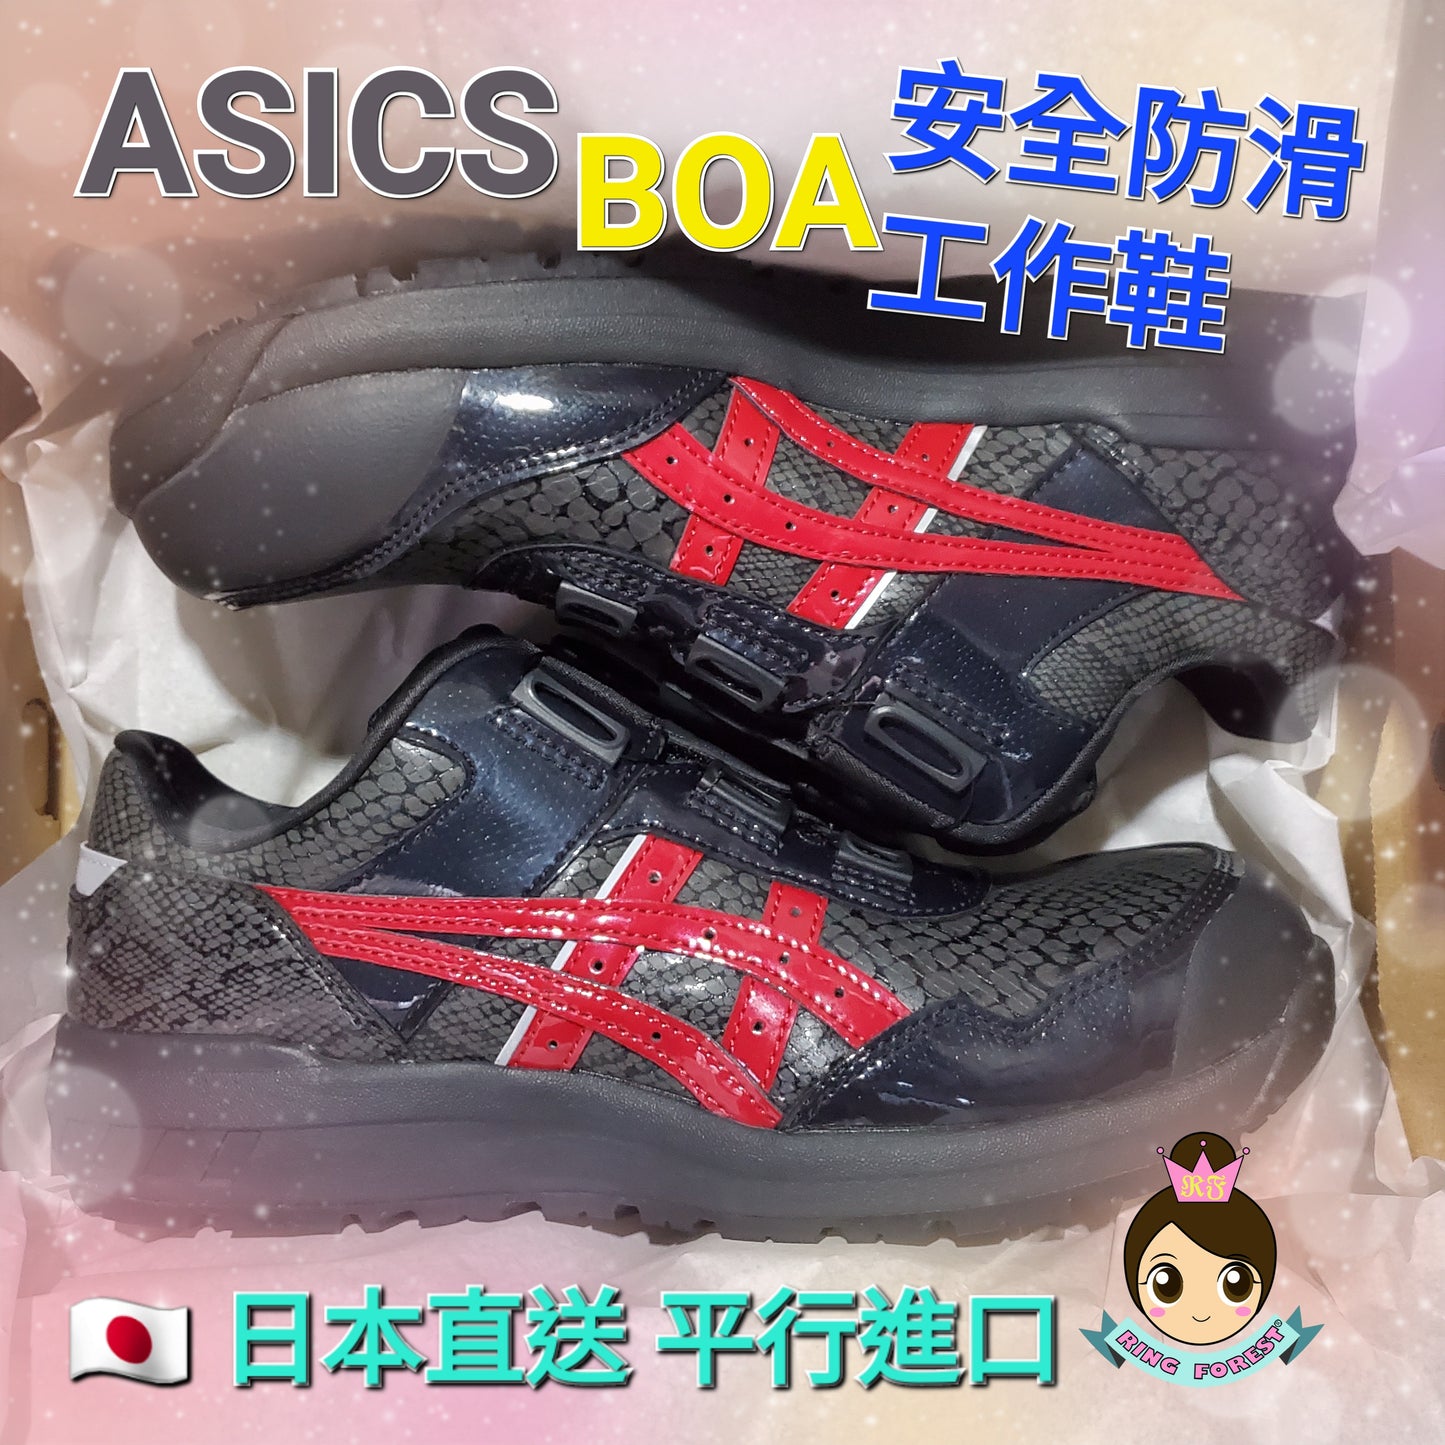 🎌Japan🎌 Direct delivery [Limited time reservation] Limited snakeskin pattern ASICS BOA anti-slip safety work shoes CP306